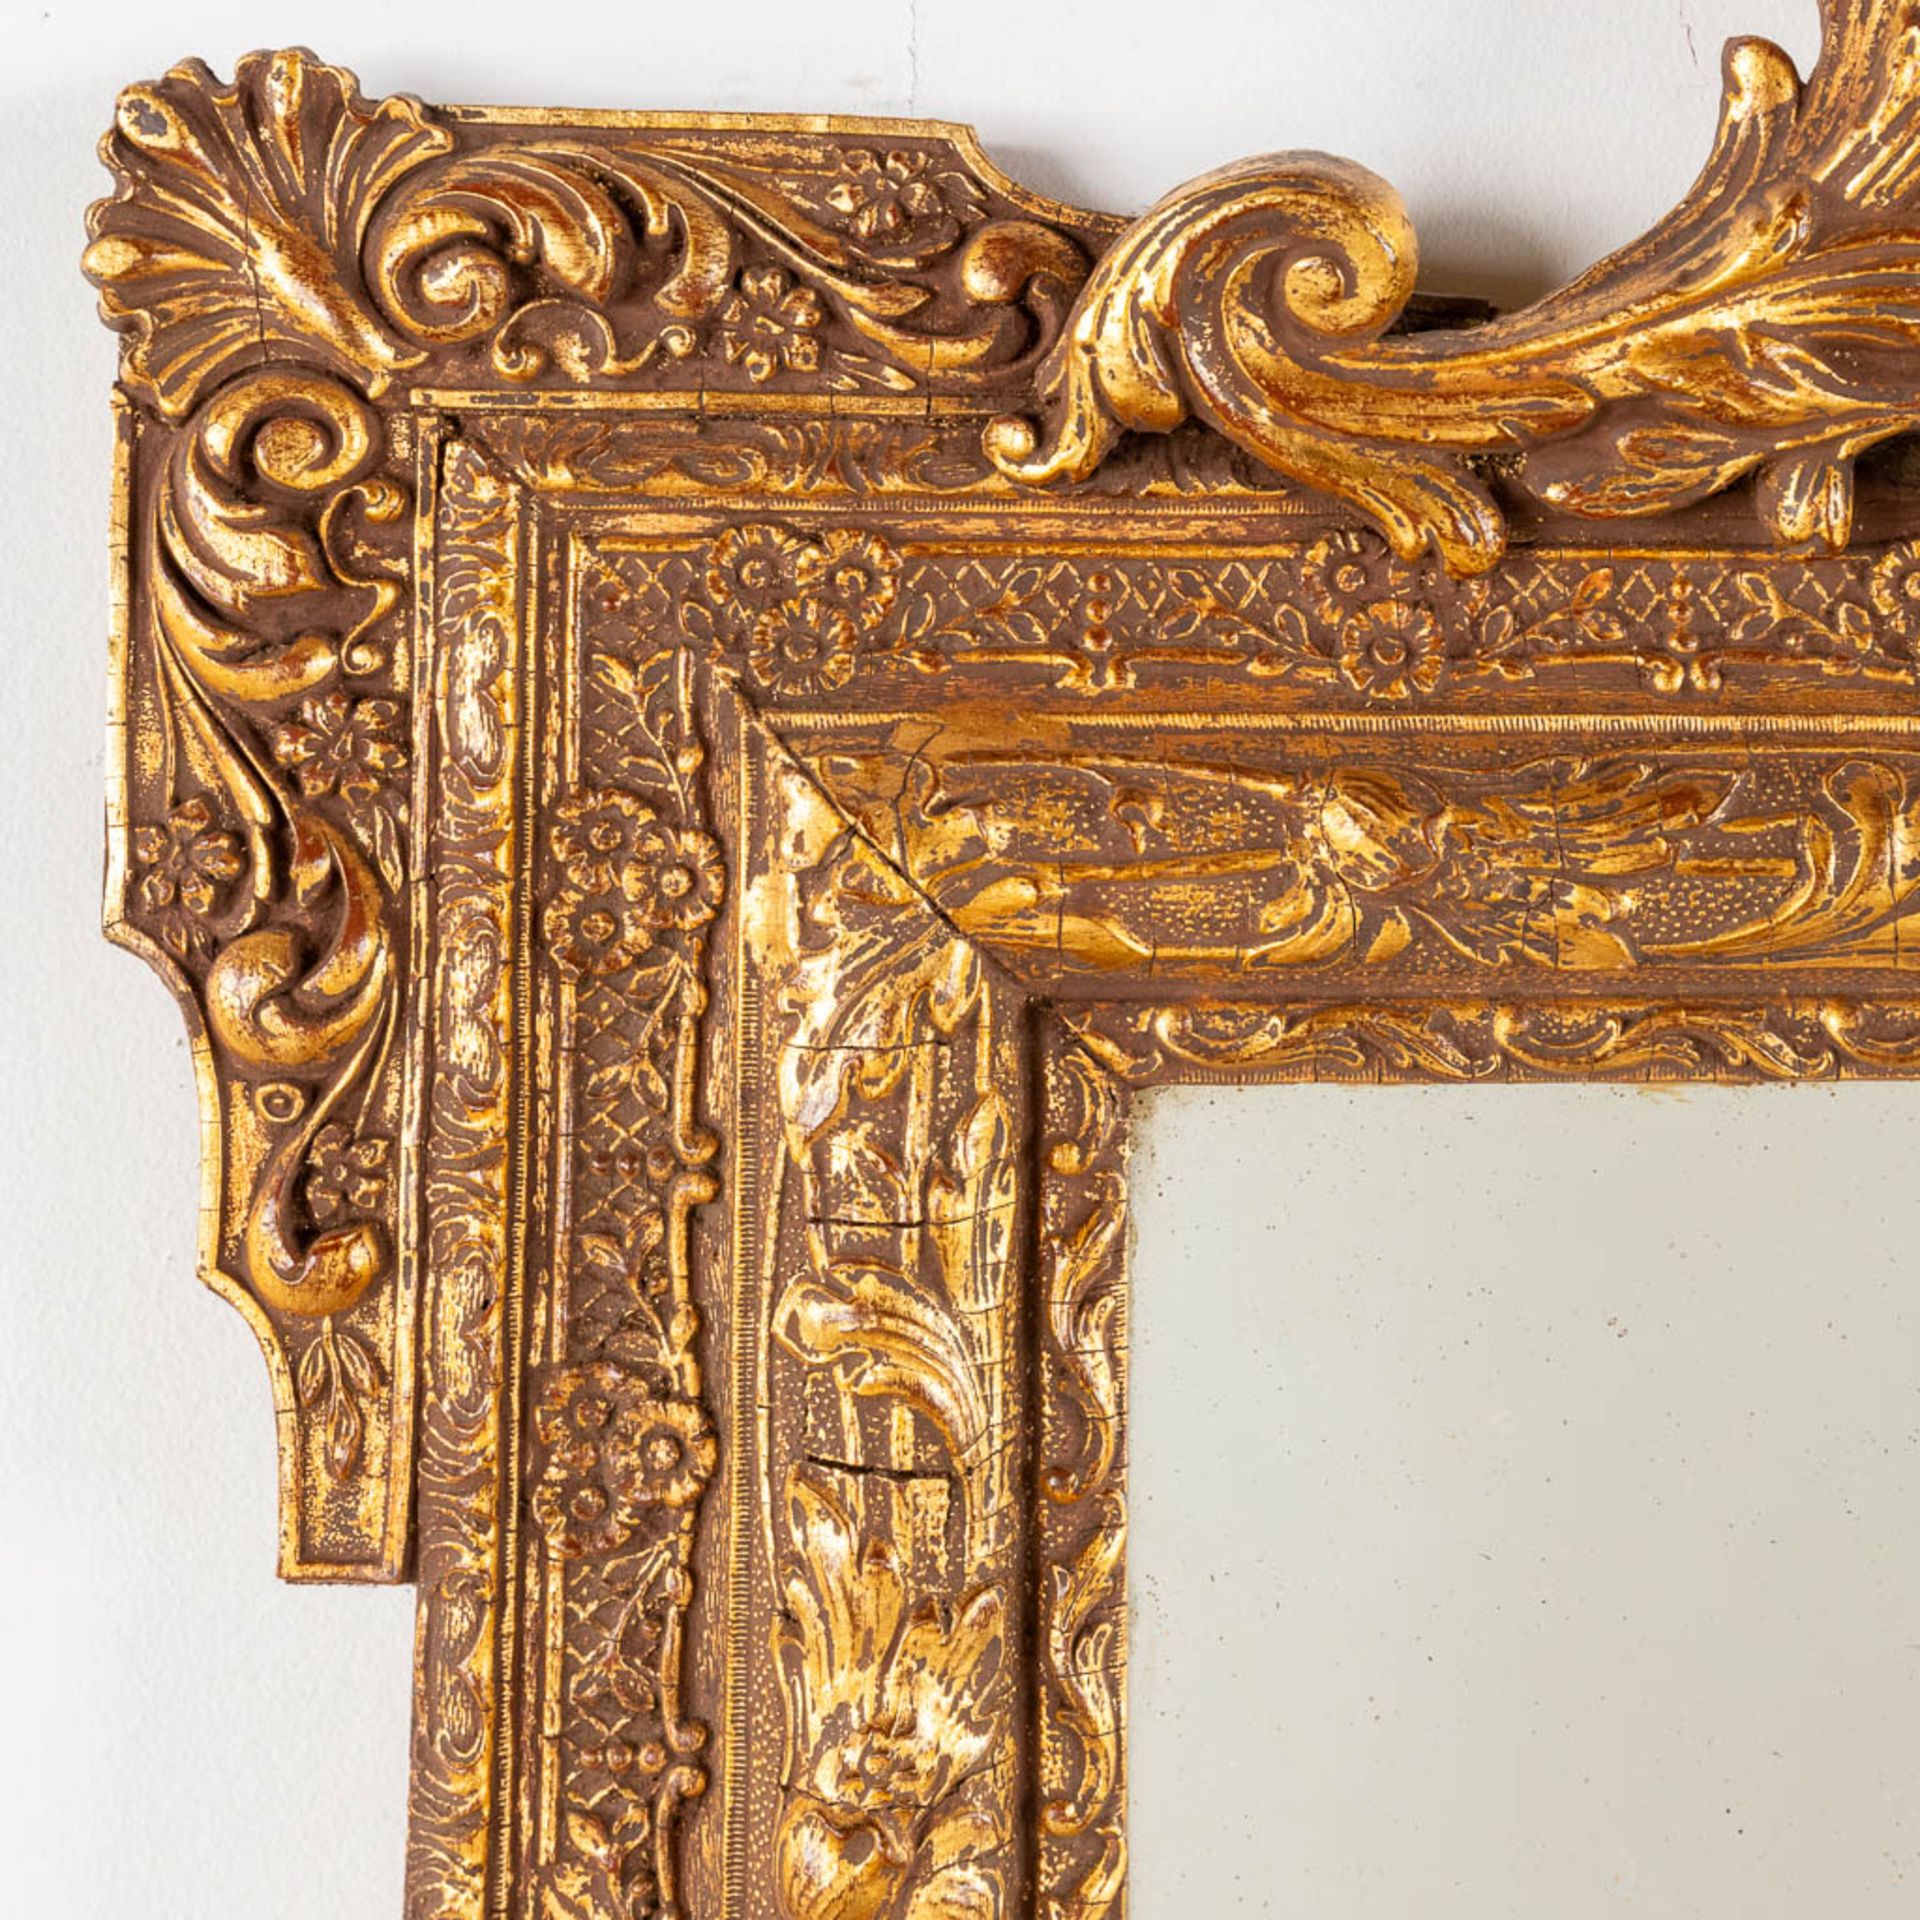 A mirror, sculptured wood and gilt stucco. Circa 1900. (W:135 x H:85 cm) - Image 5 of 8